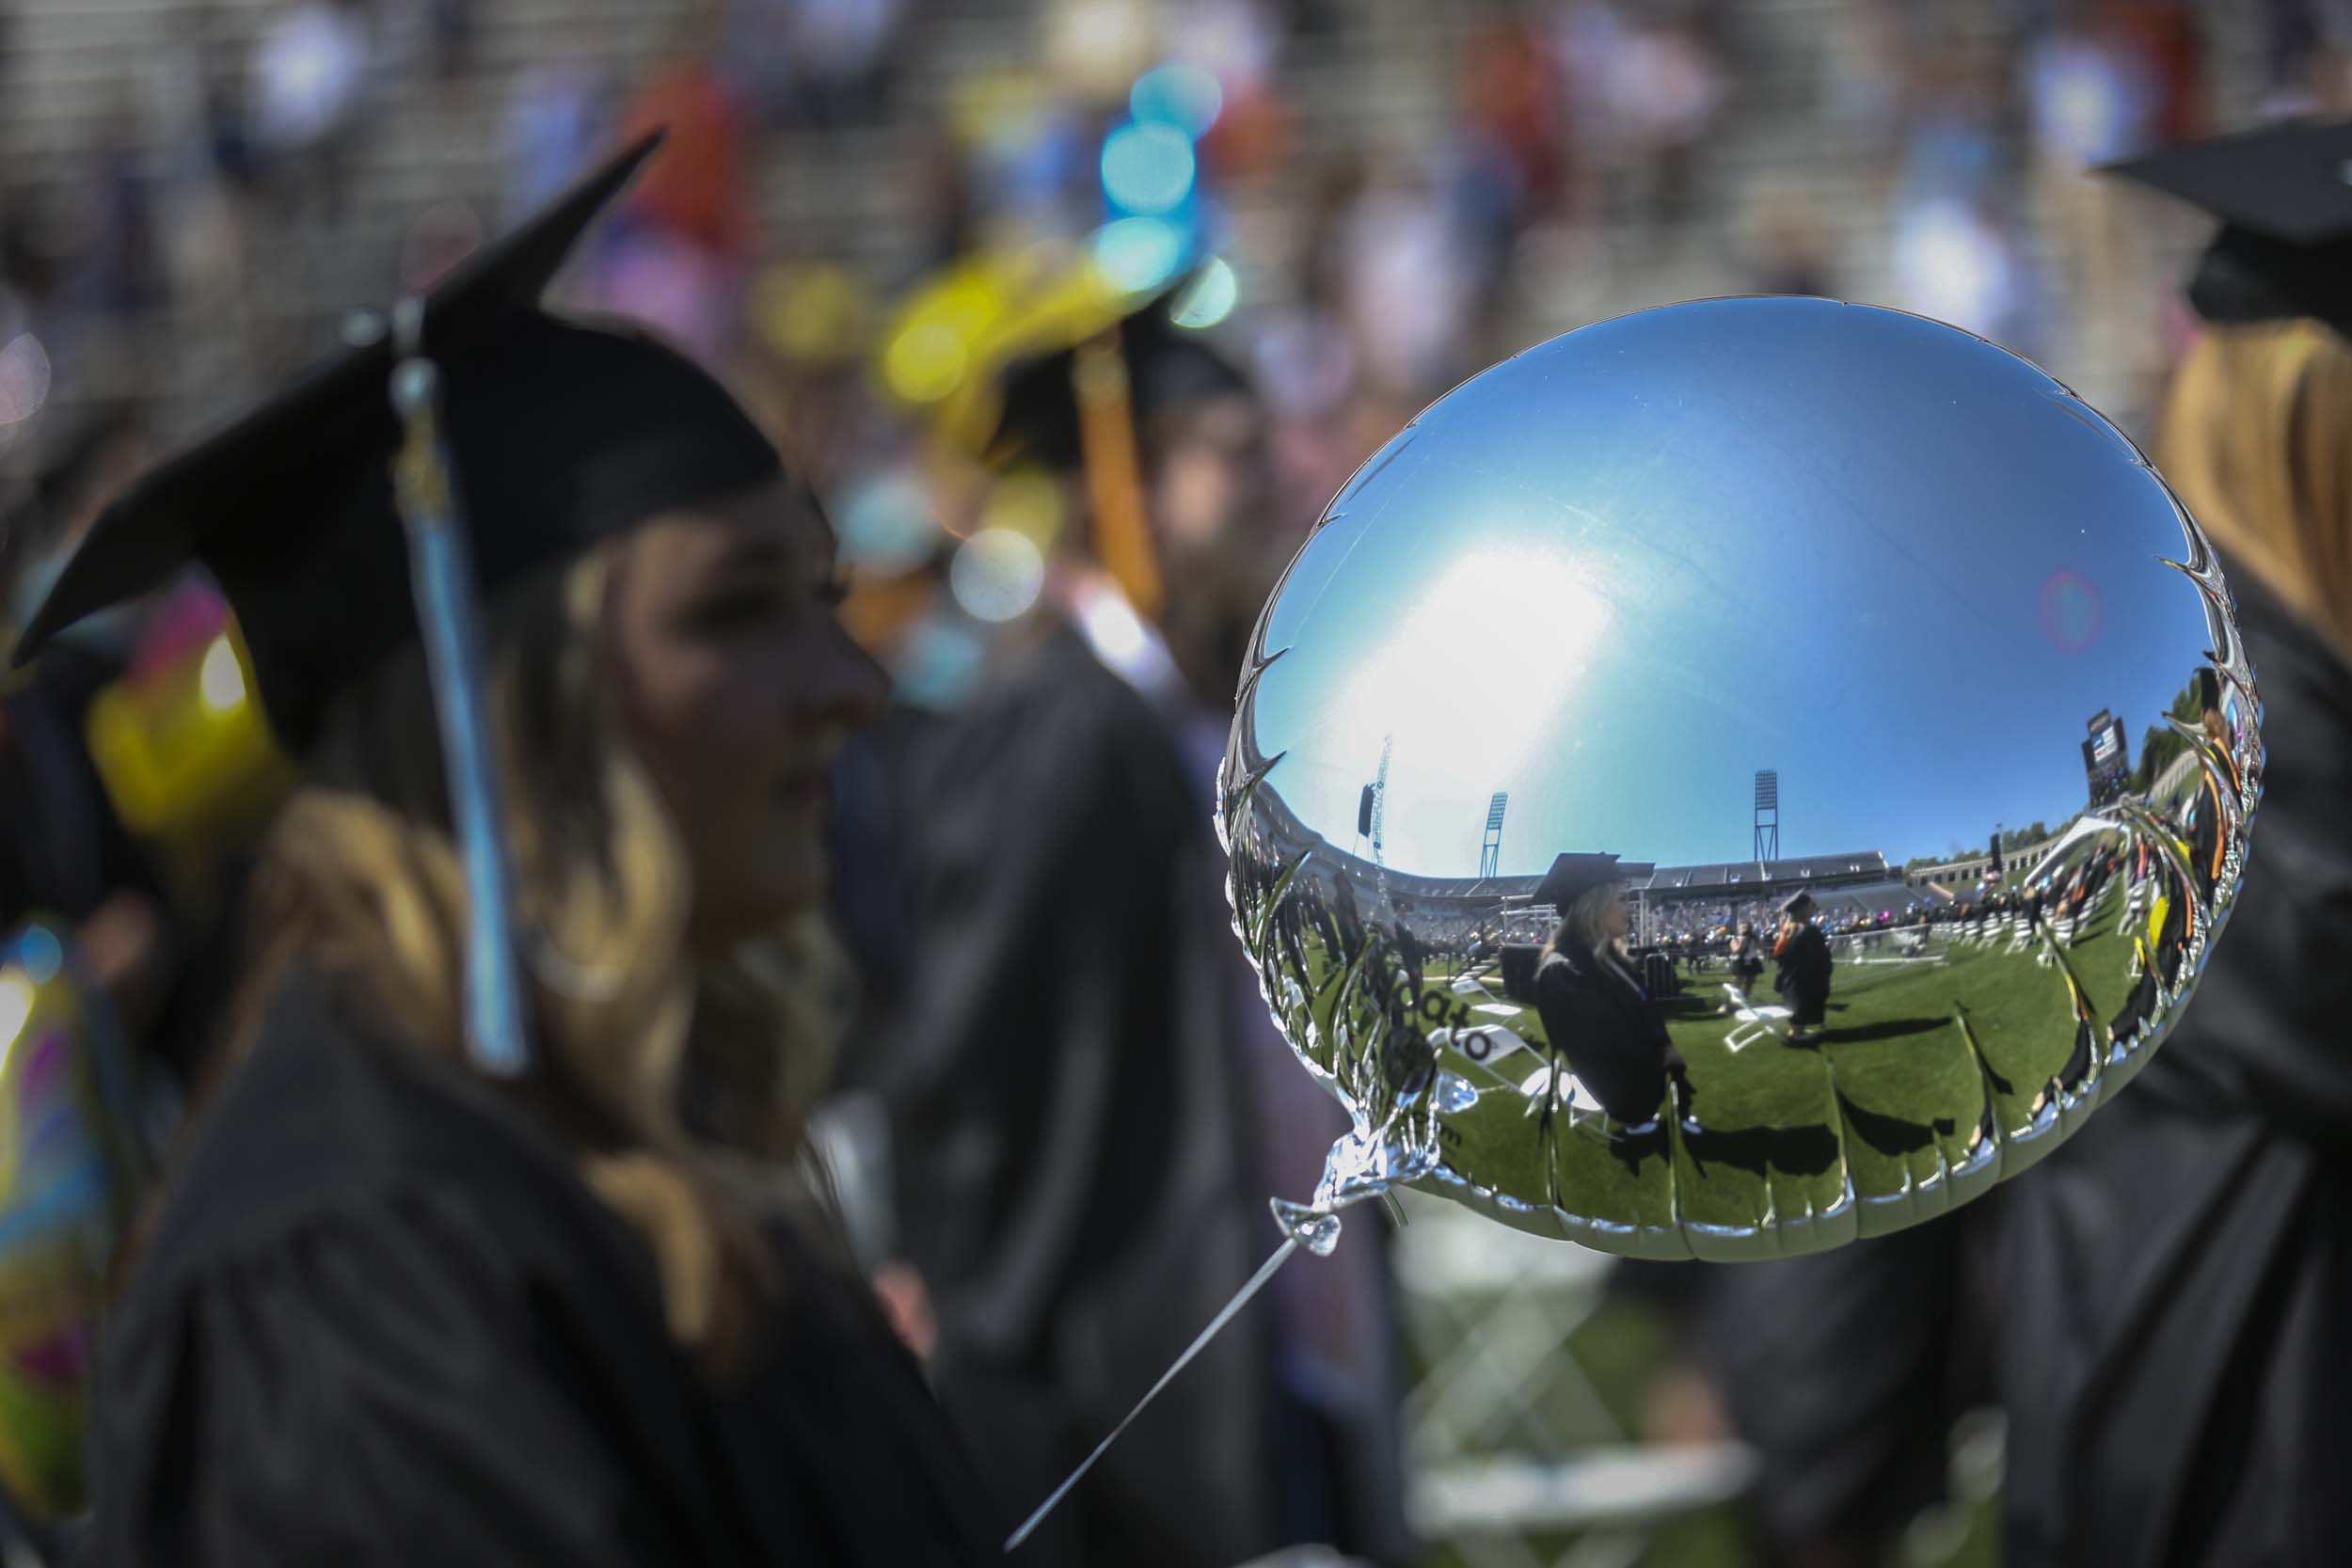 Reflection off of a shiny silver balloon of the graduates standing next to their socially distanced chairs